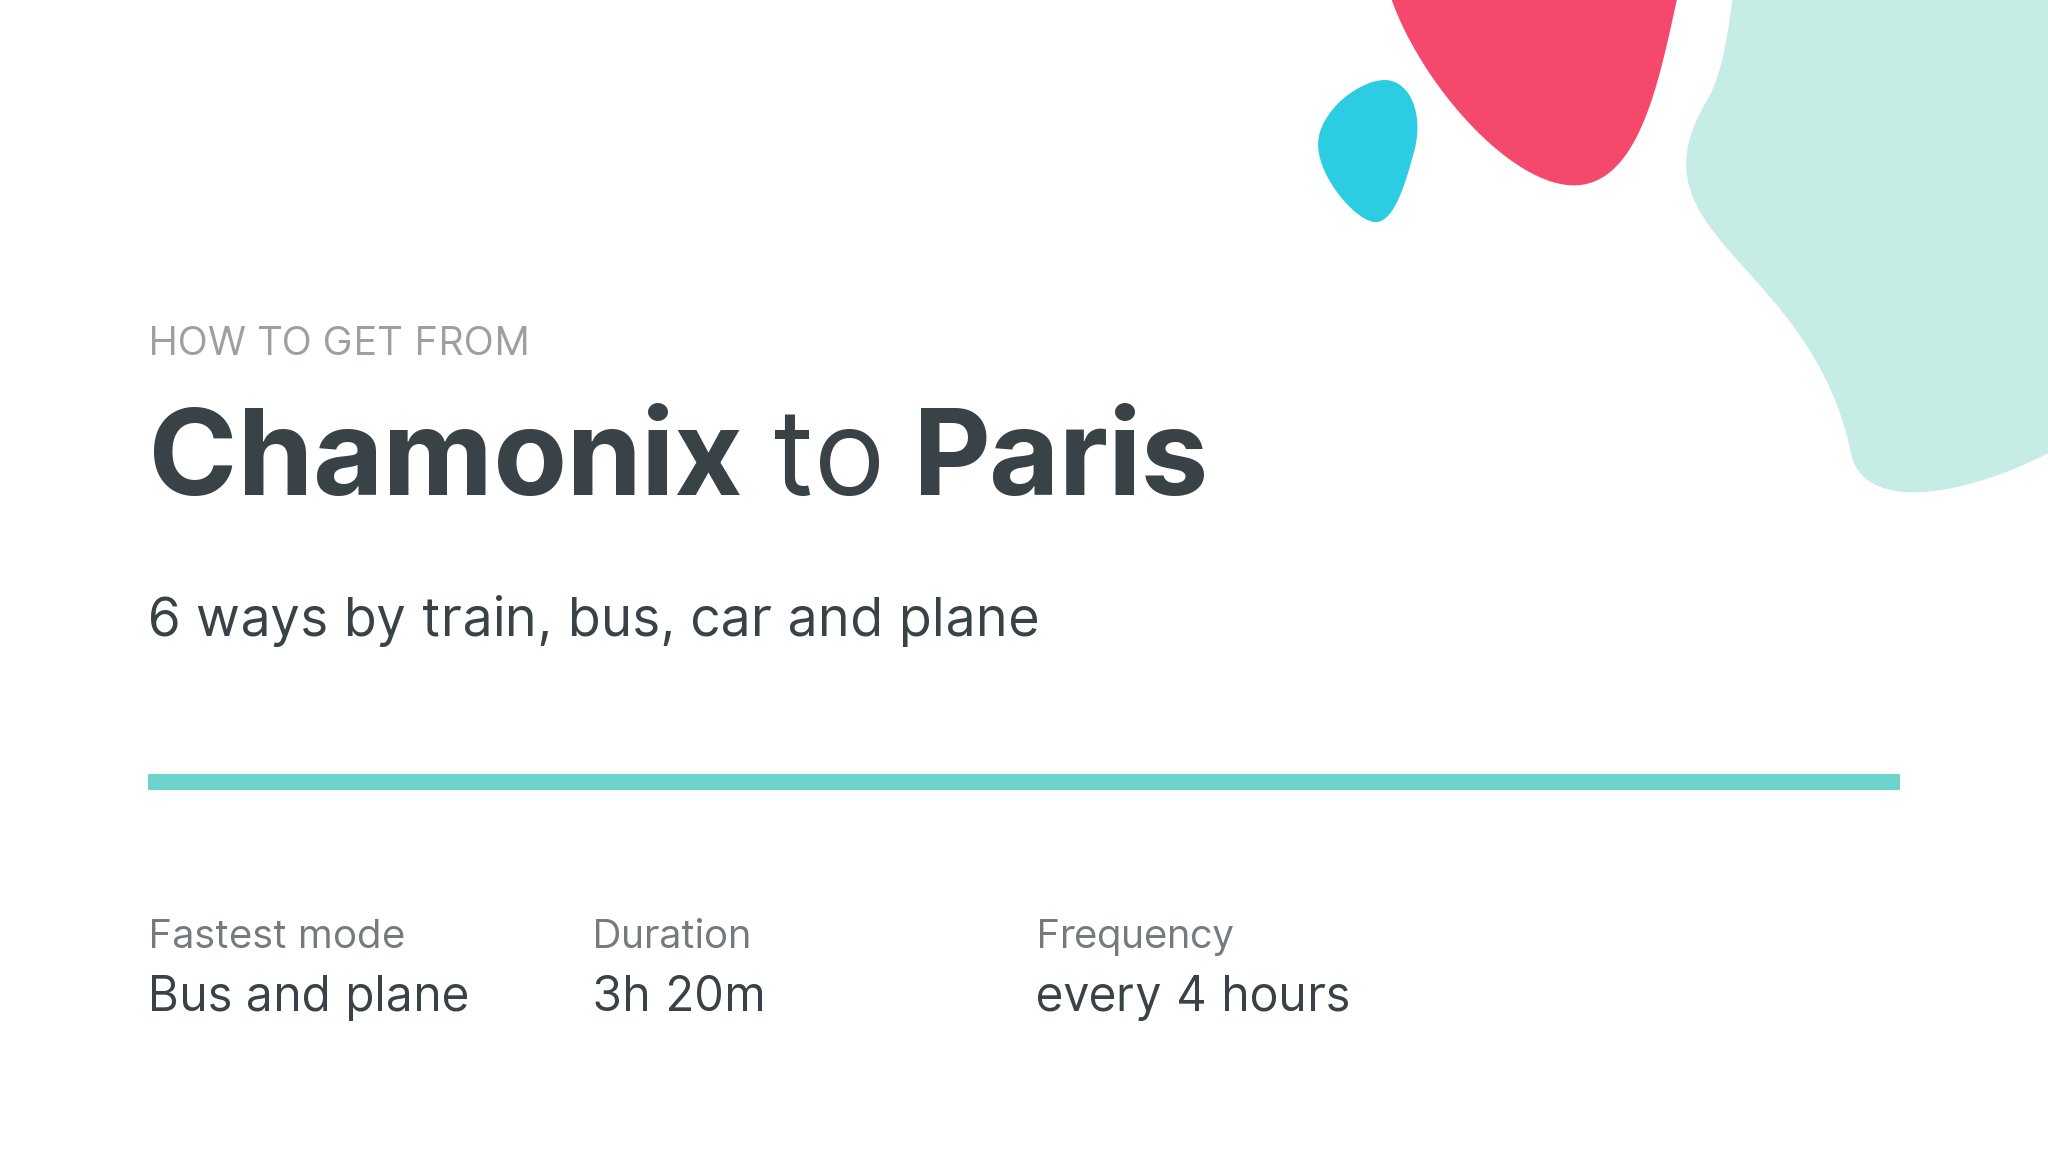 How do I get from Chamonix to Paris